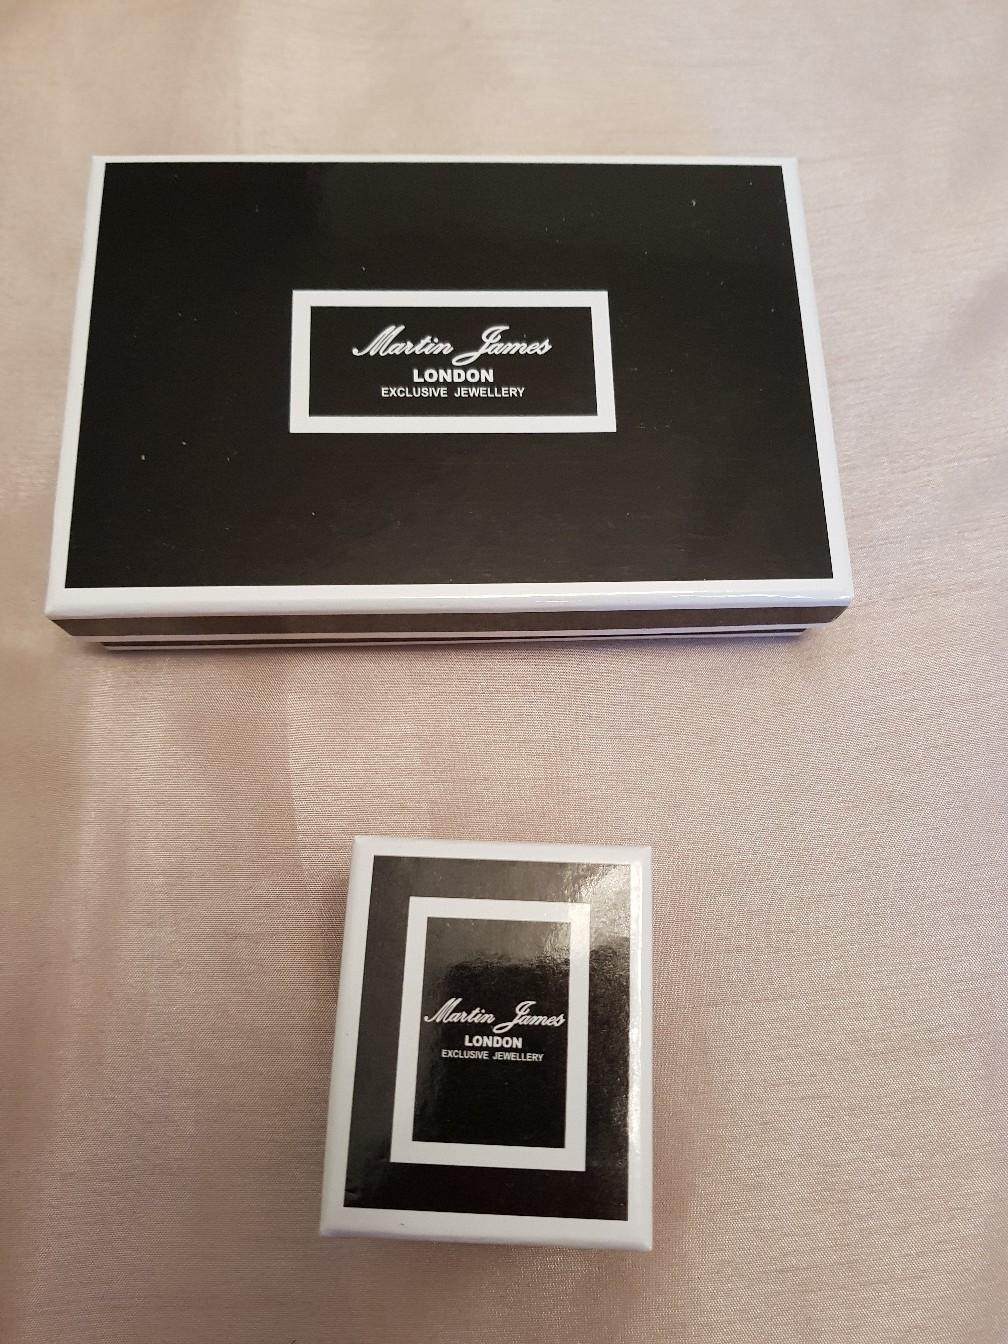 NEW Martin James London Jewellery set in B23 Birmingham for £30.00 for ...